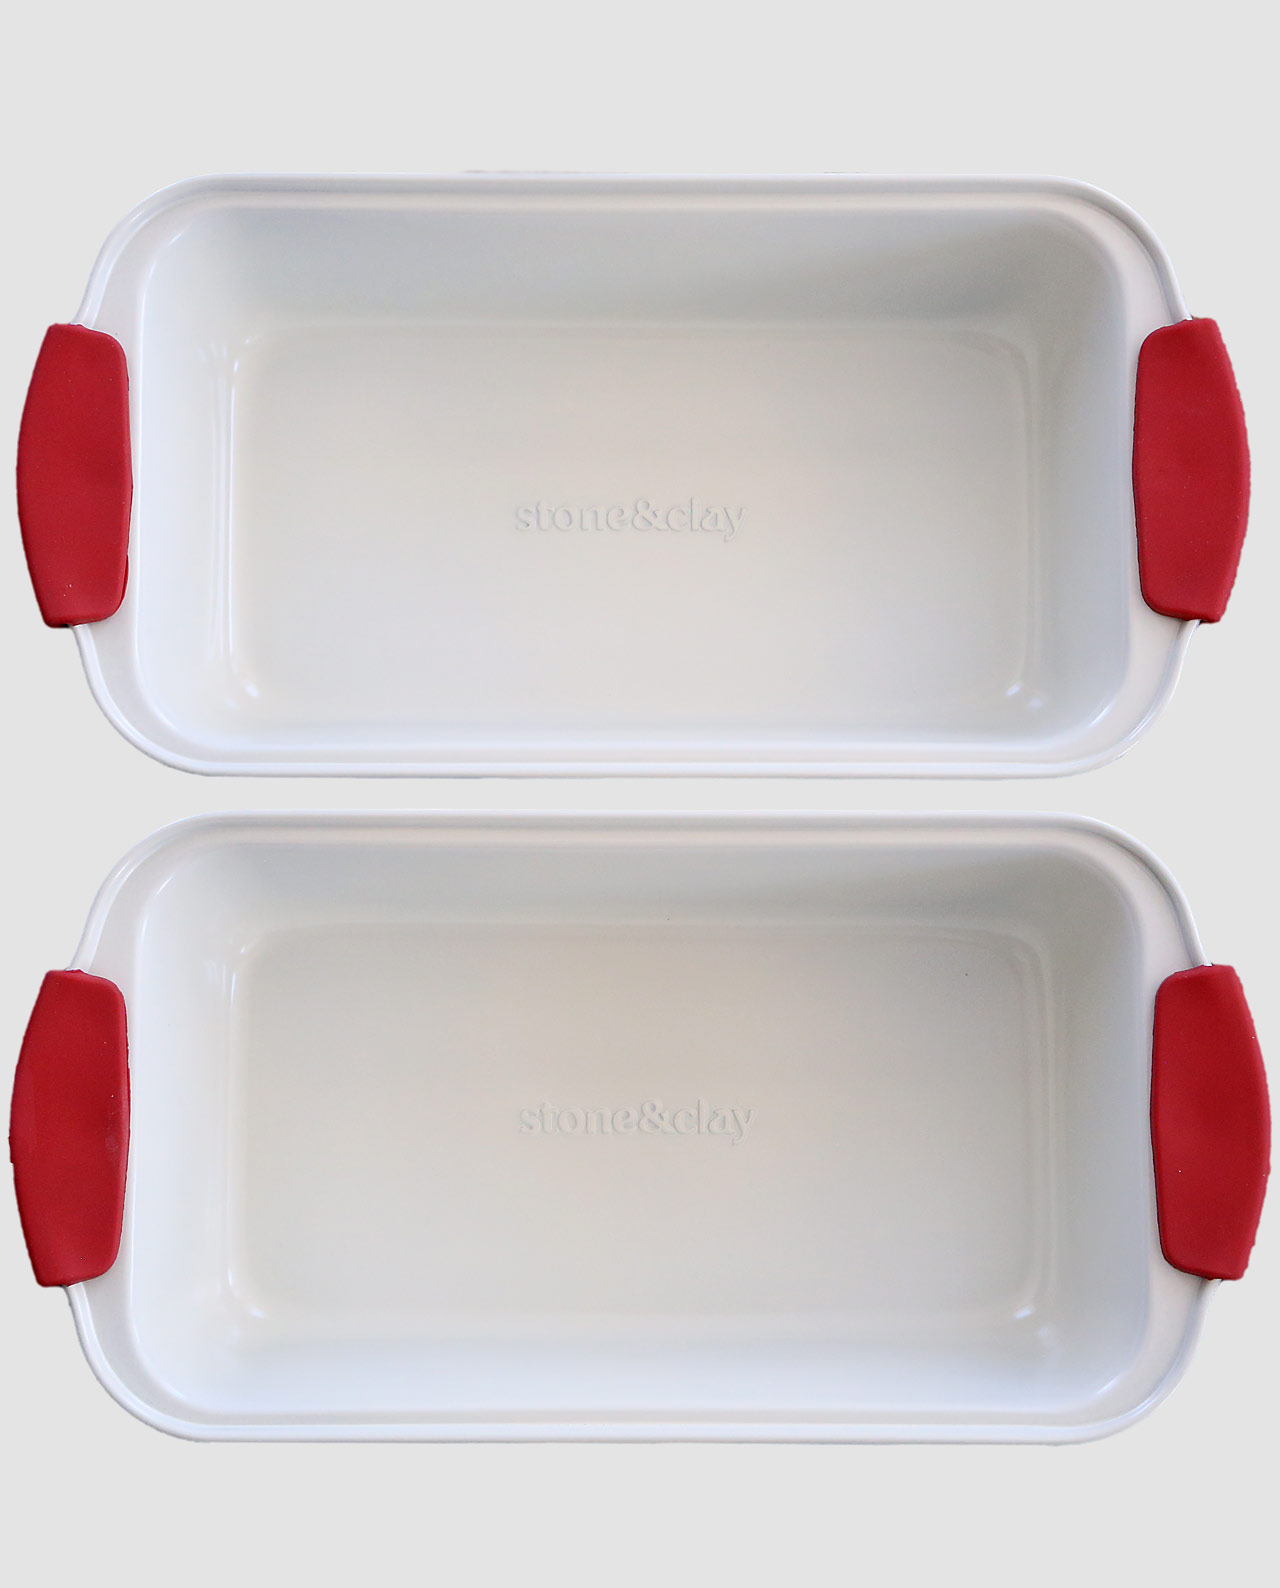 Large Loaf Pan (Set of Two) – Breadtopia